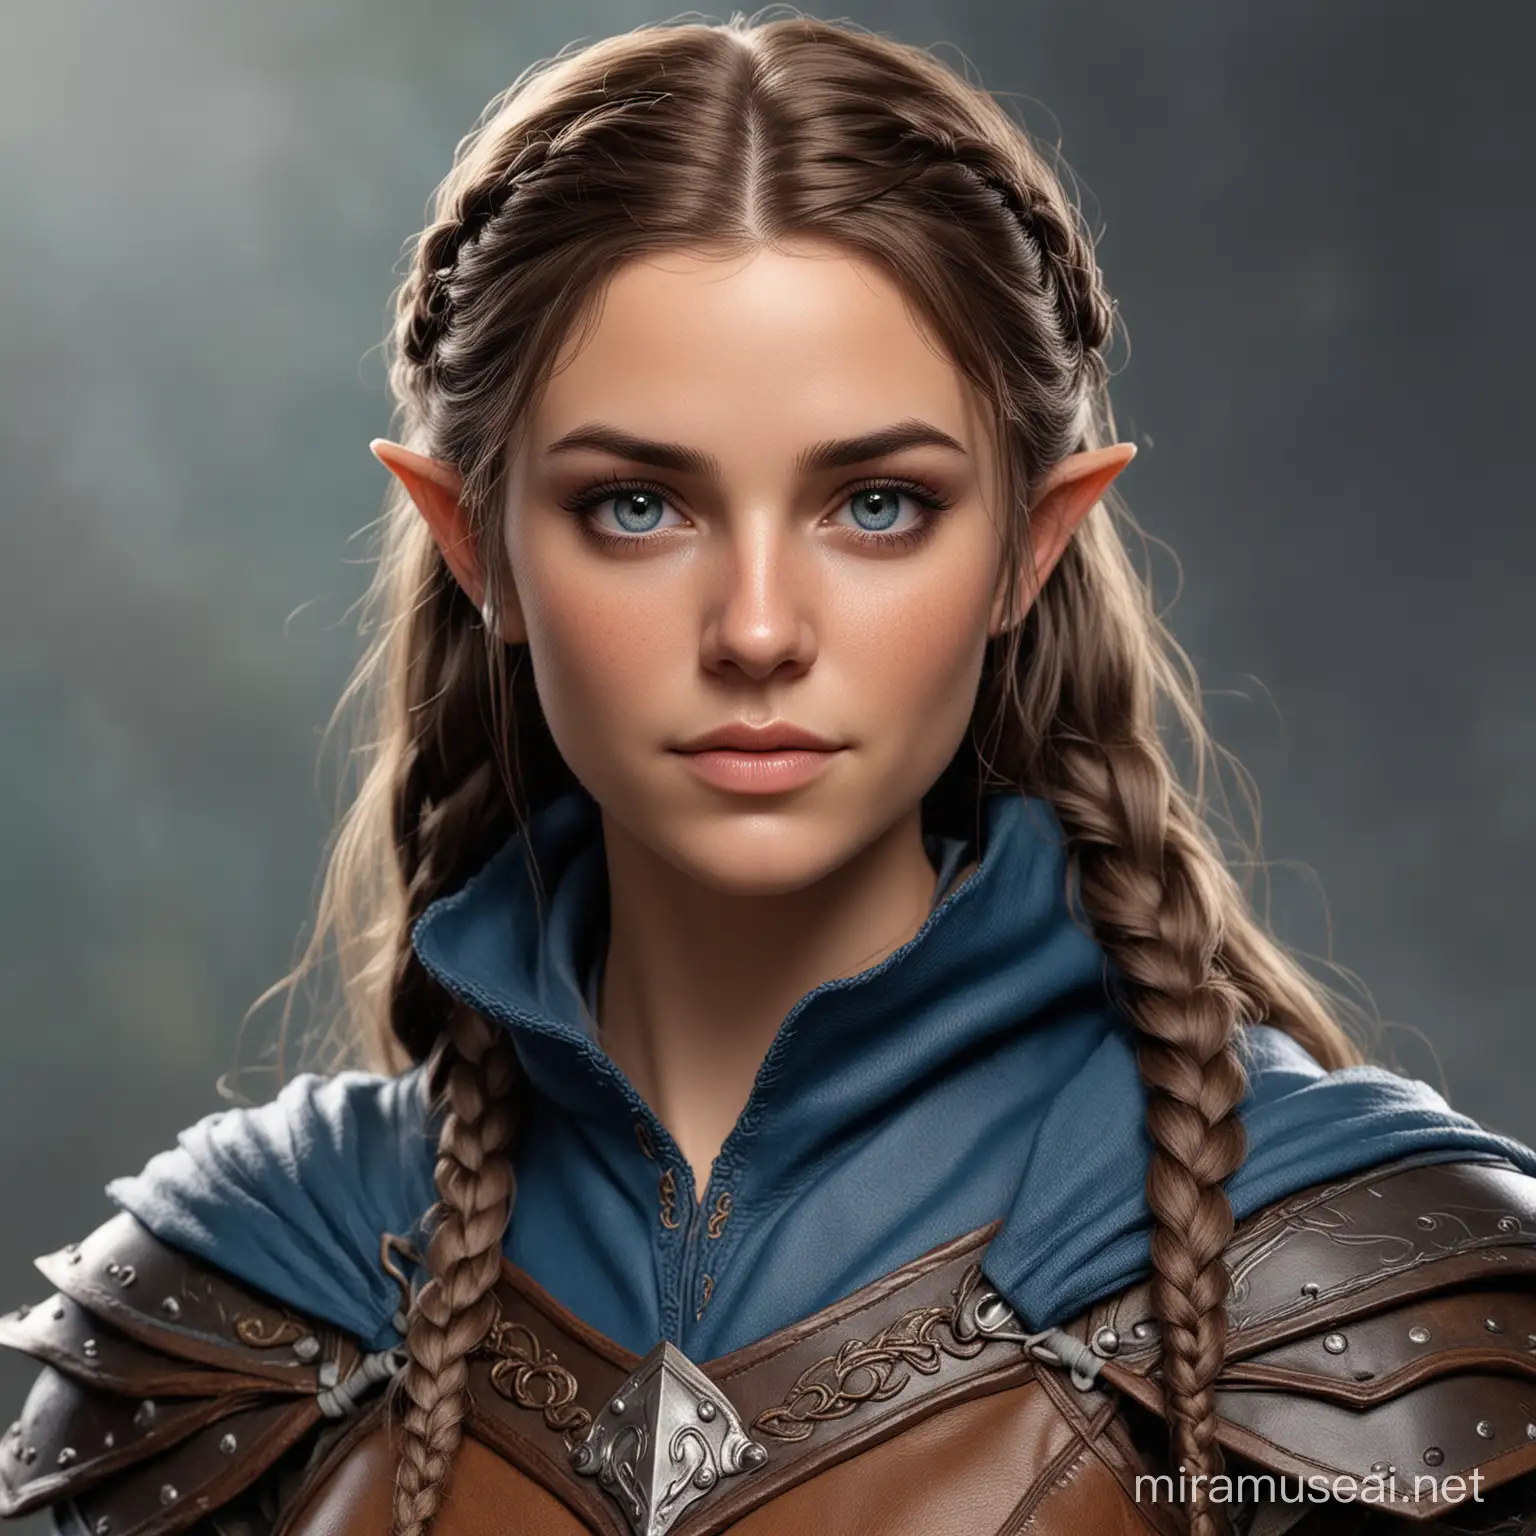 Lorelei, Beautiful Half Elf bard, her hair is brown and braided, her eyes are blue, and ears are pointed. Her skin is dark tan, and she has freckles across her nose. She is wearing leather armor and a blue cloak.